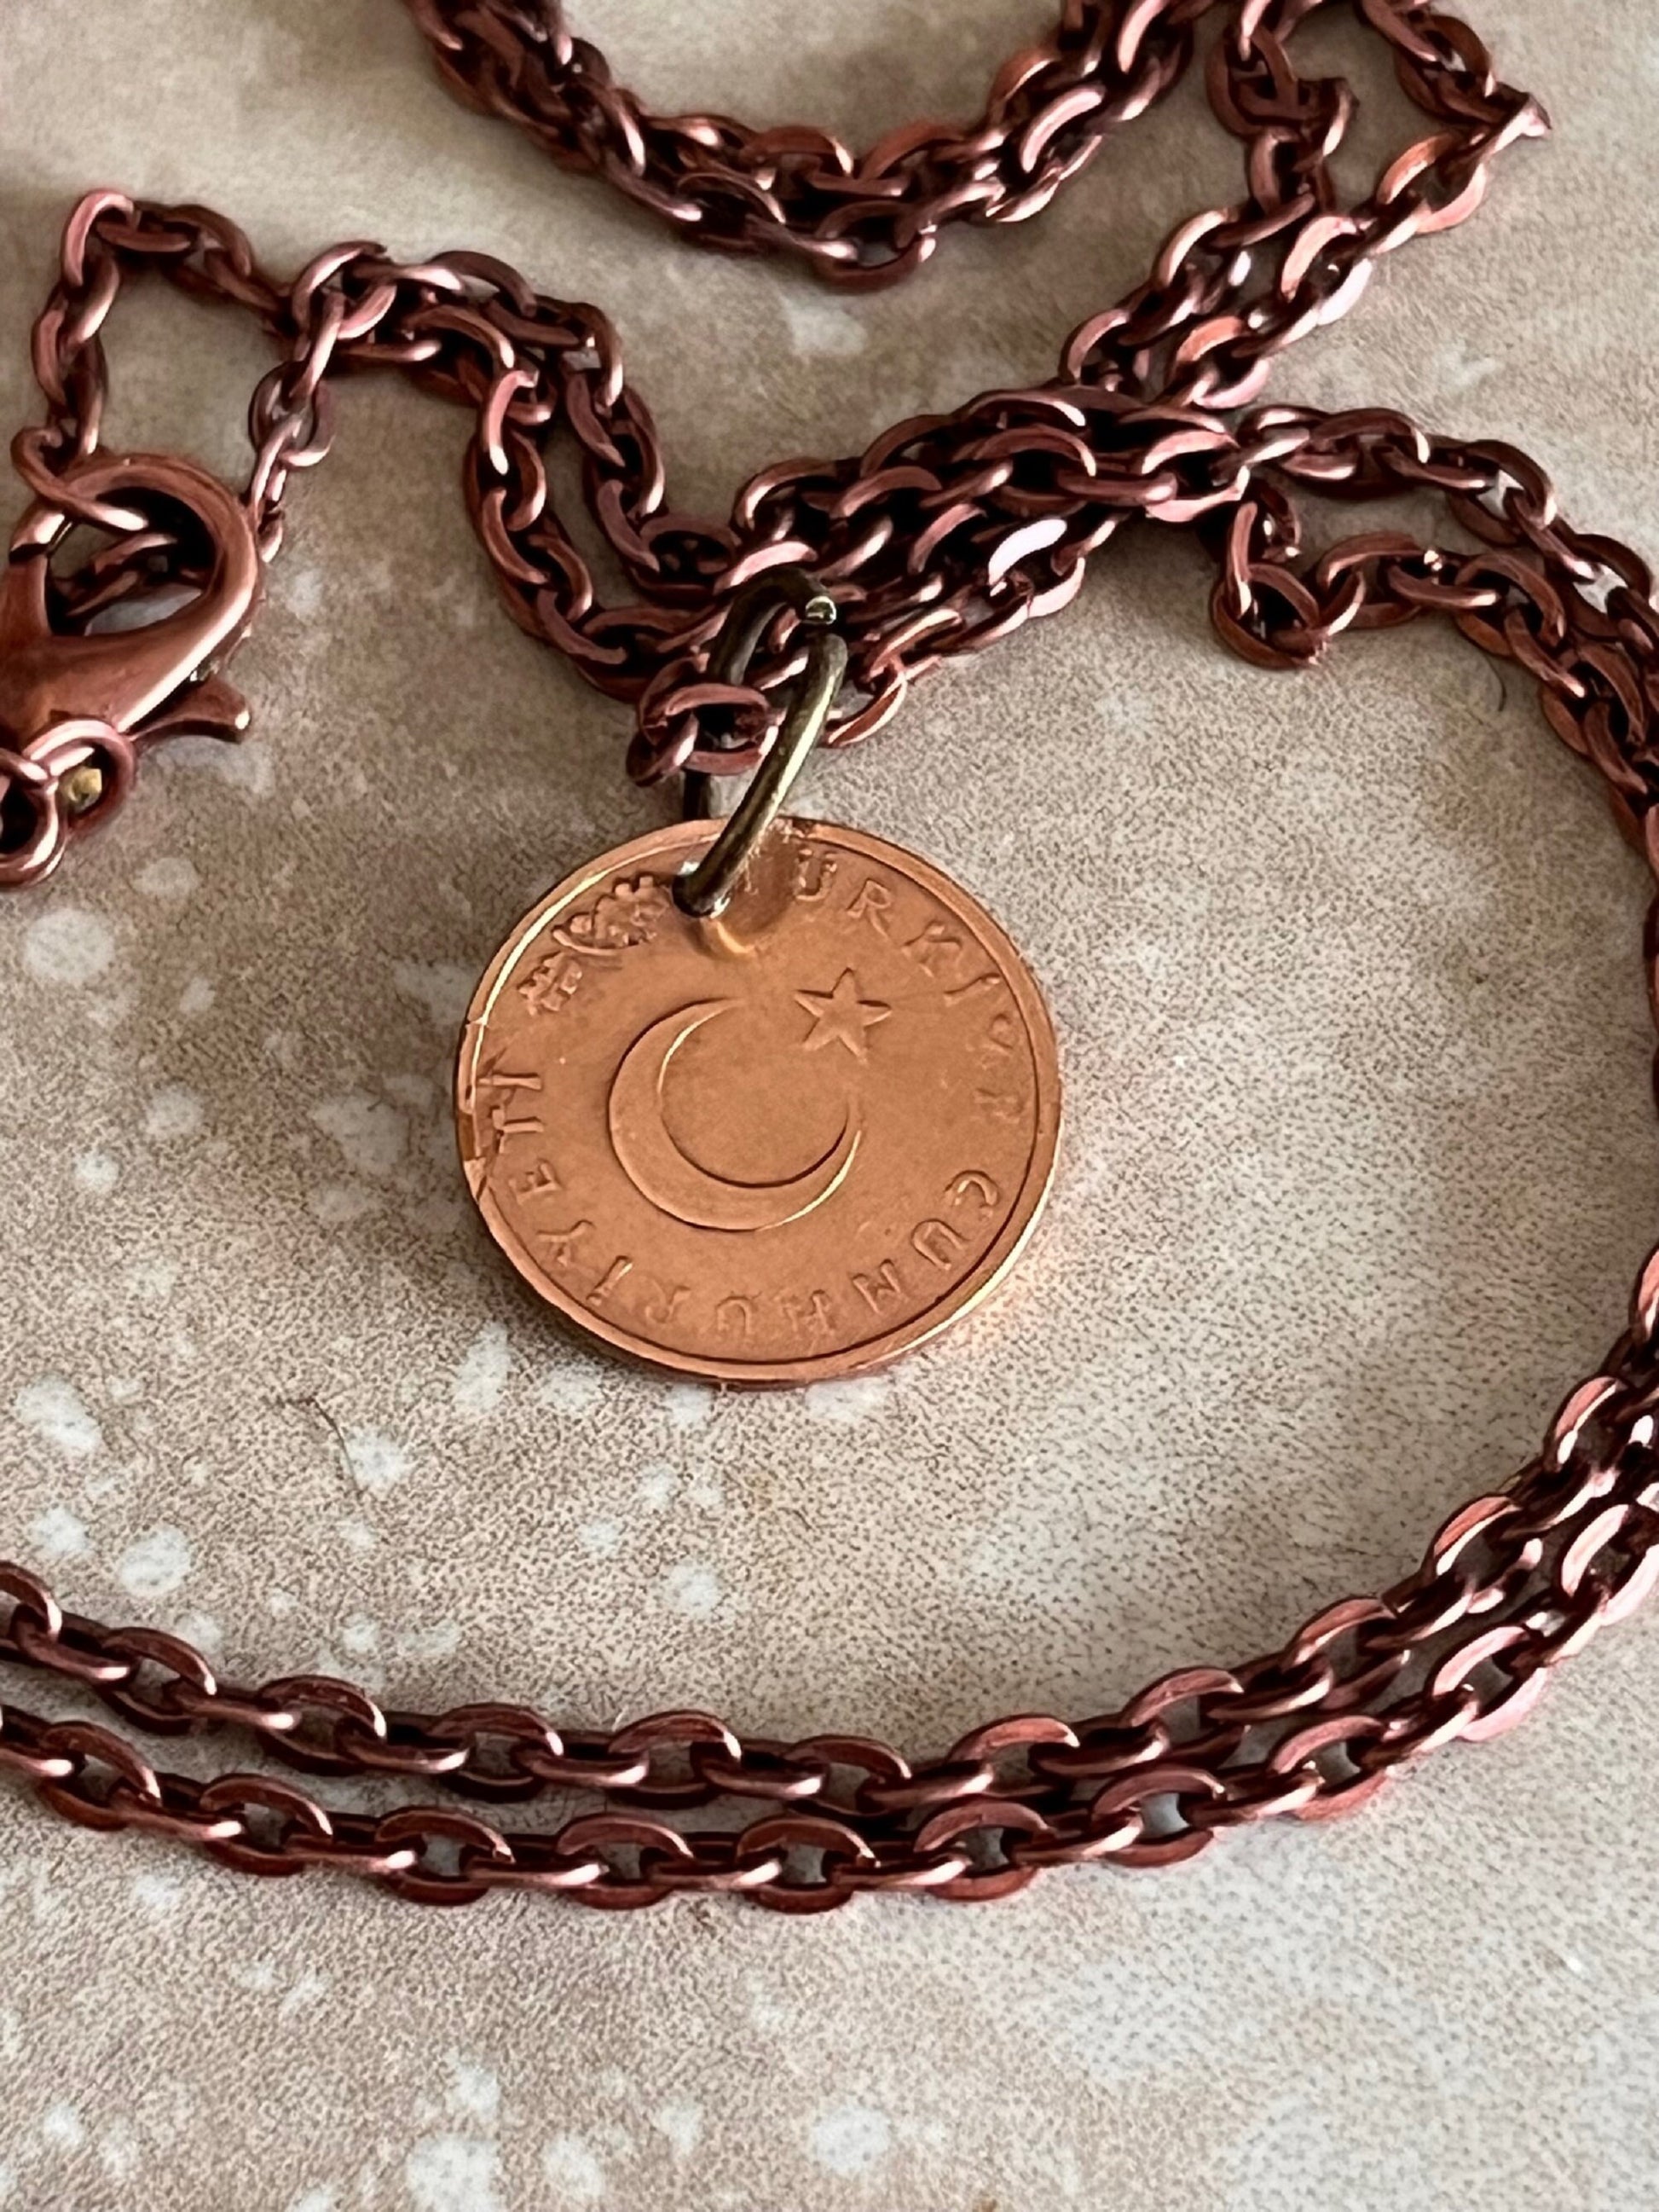 Turkey Coin Turkish 1 Kurus Necklace Pendant Personal Necklace Vintage Handmade Jewelry Gift Friend Charm For Him Her World Coin Collector